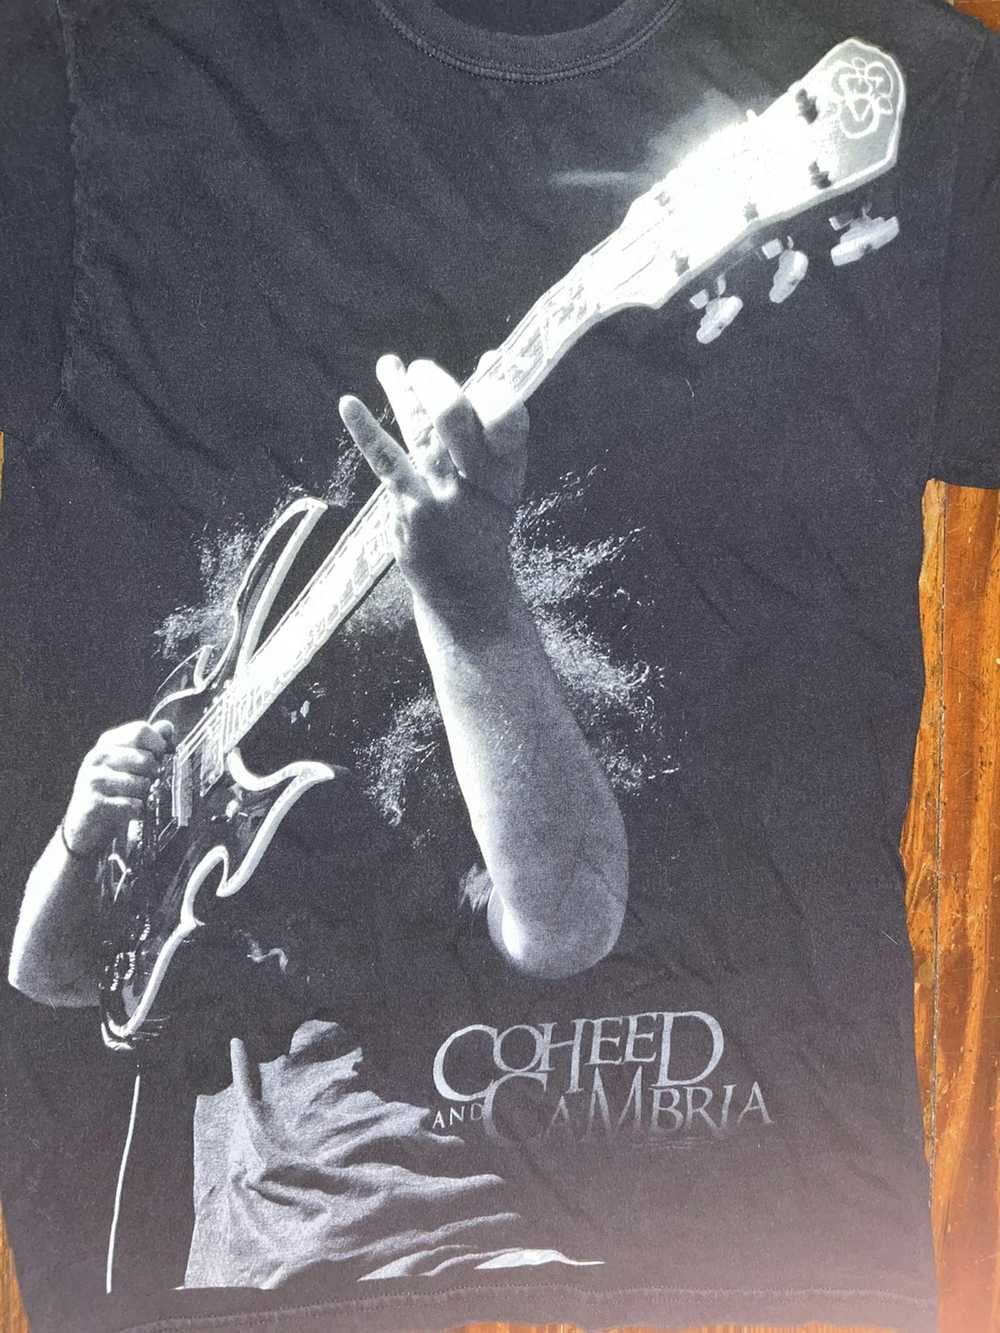 Rock T Shirt × Vintage Coheed and Cambria Tee - image 1